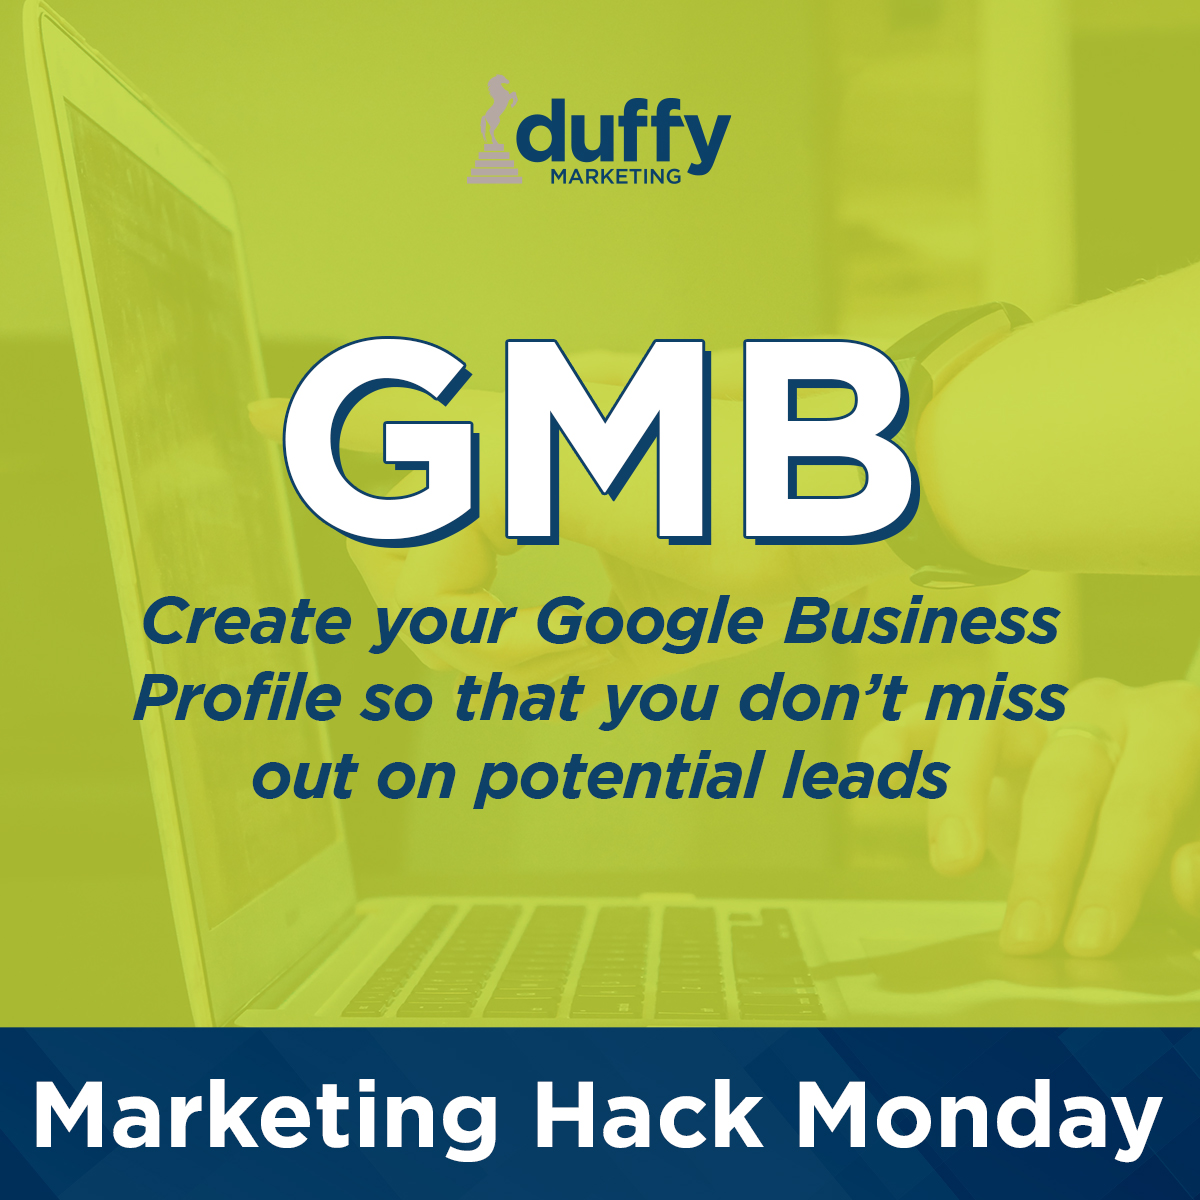 Have you created a Google Business Profile for your business? If not, you are missing out on potential leads. Creating this profile will make it easier for local and nearby residents to quickly find you! 👋 😁 bit.ly/48j4N6z

#MarketingIdeas #DuffyMarketing #Marketing